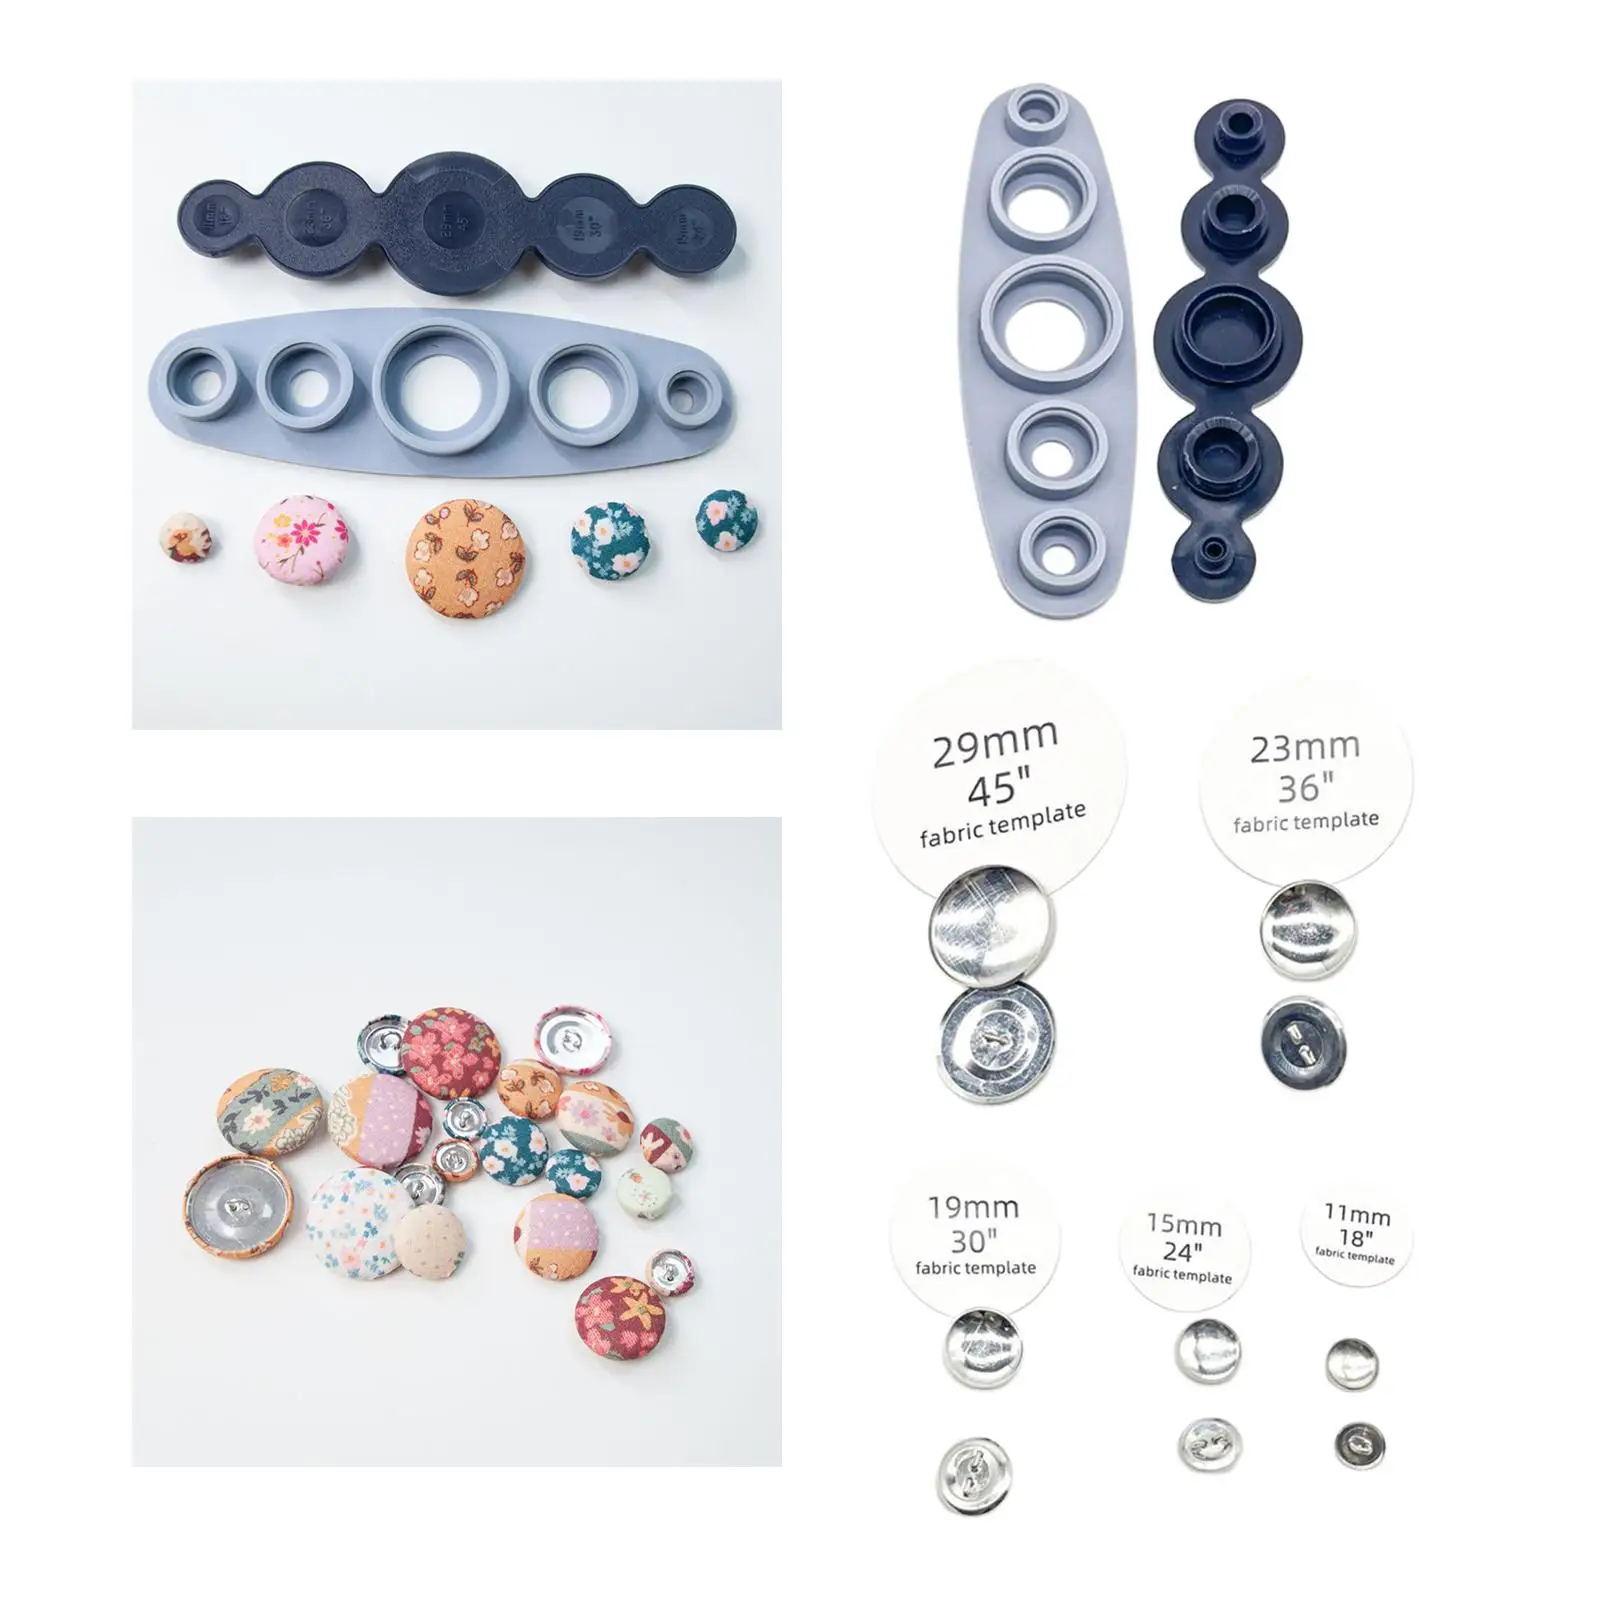 Tool for Cover Buttons Fabric Covered Buttons Jeans 11mm, 15mm, 19mm, 23mm, 29mm DIY Button Craft Set Button Maker Machine